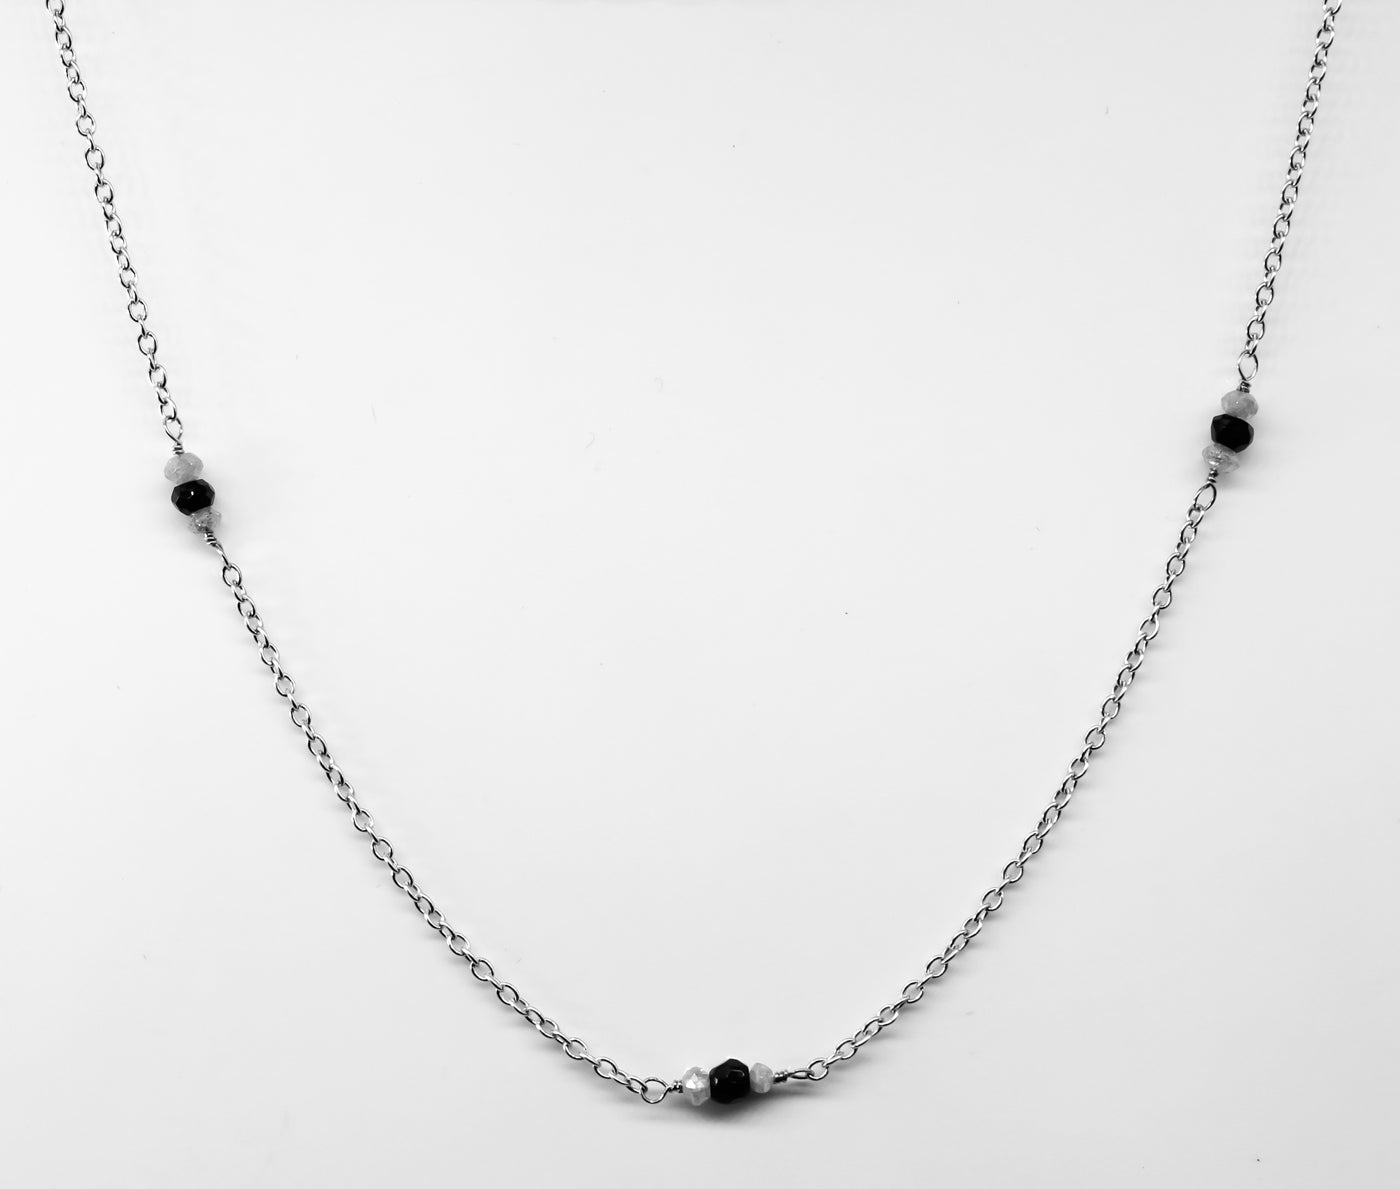 14K White Gold Cable Chain with Faceted Black Spinel and Diamond Beads